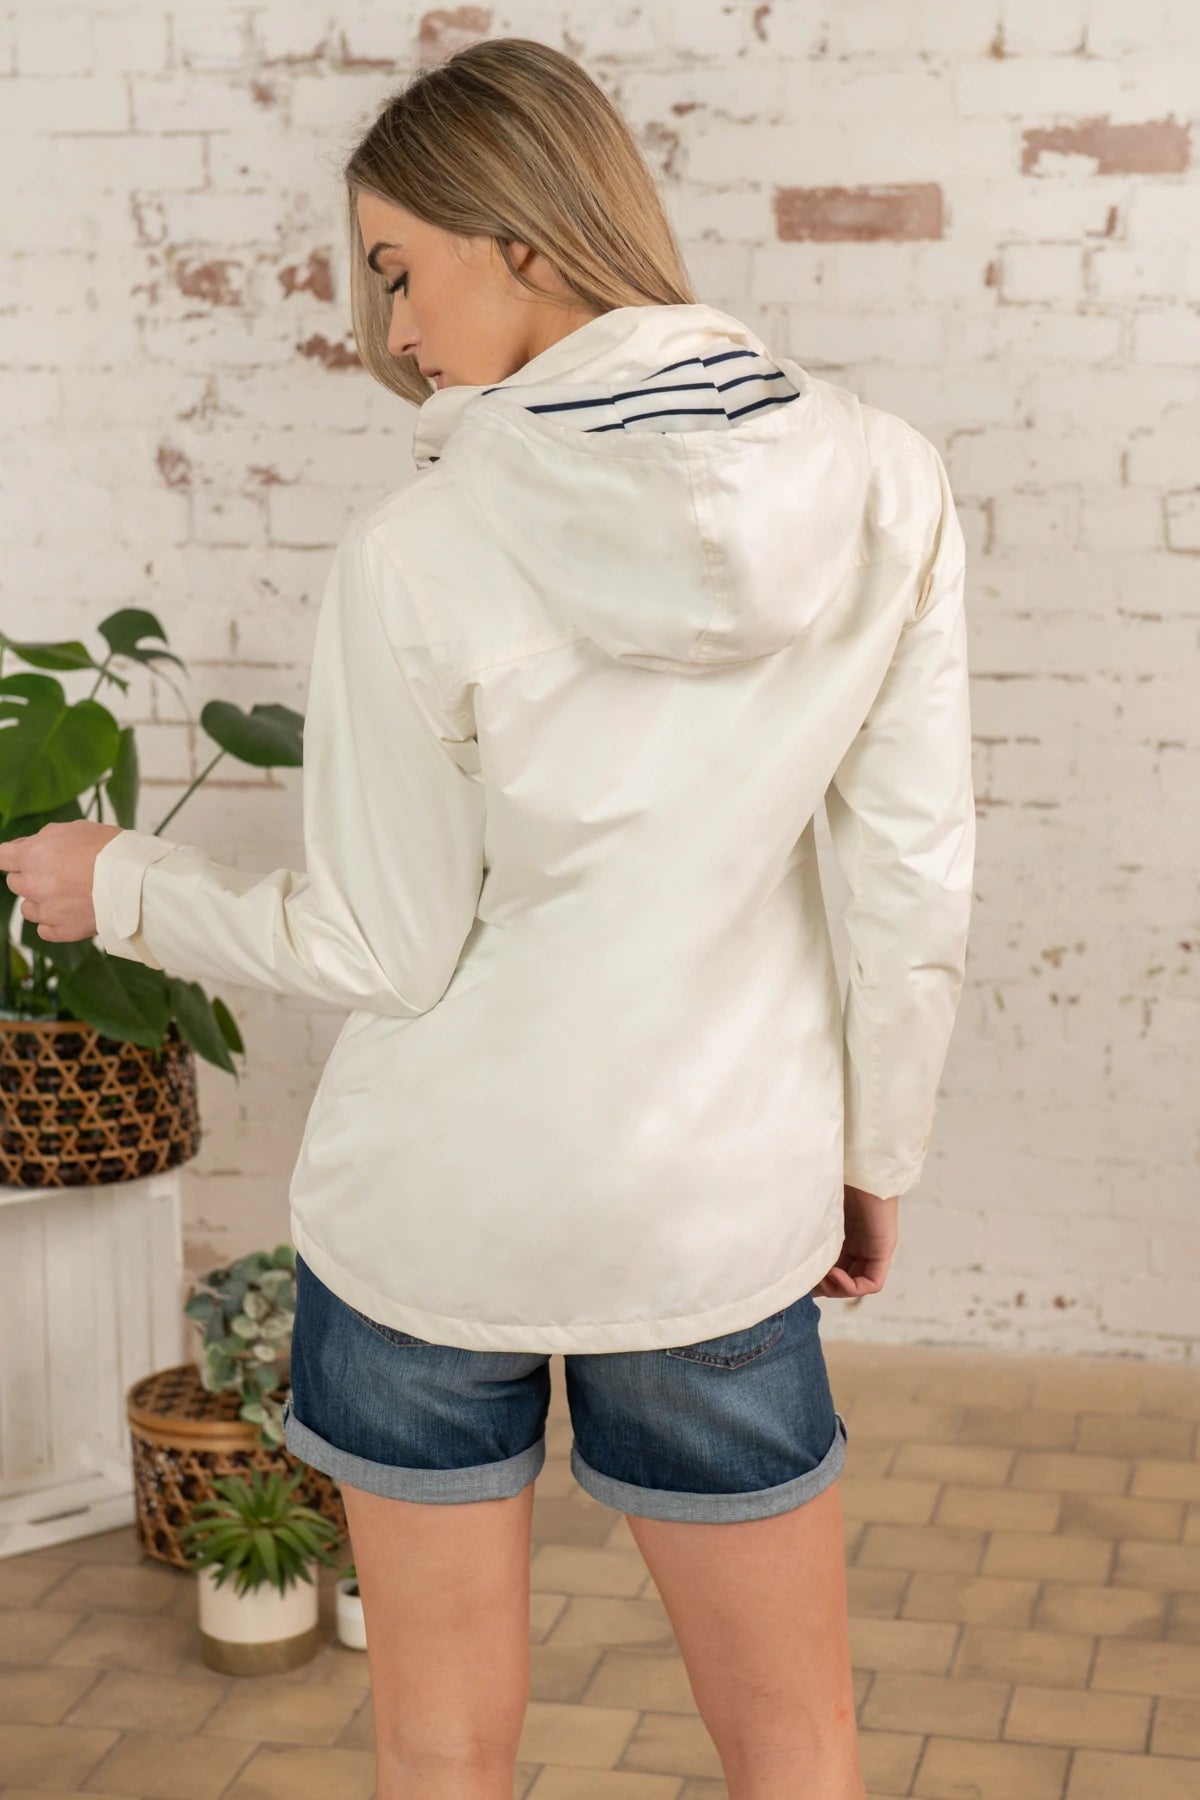 Lighthouse Ladies Beachcomber Jacket - Blanc @ Mills Country Store